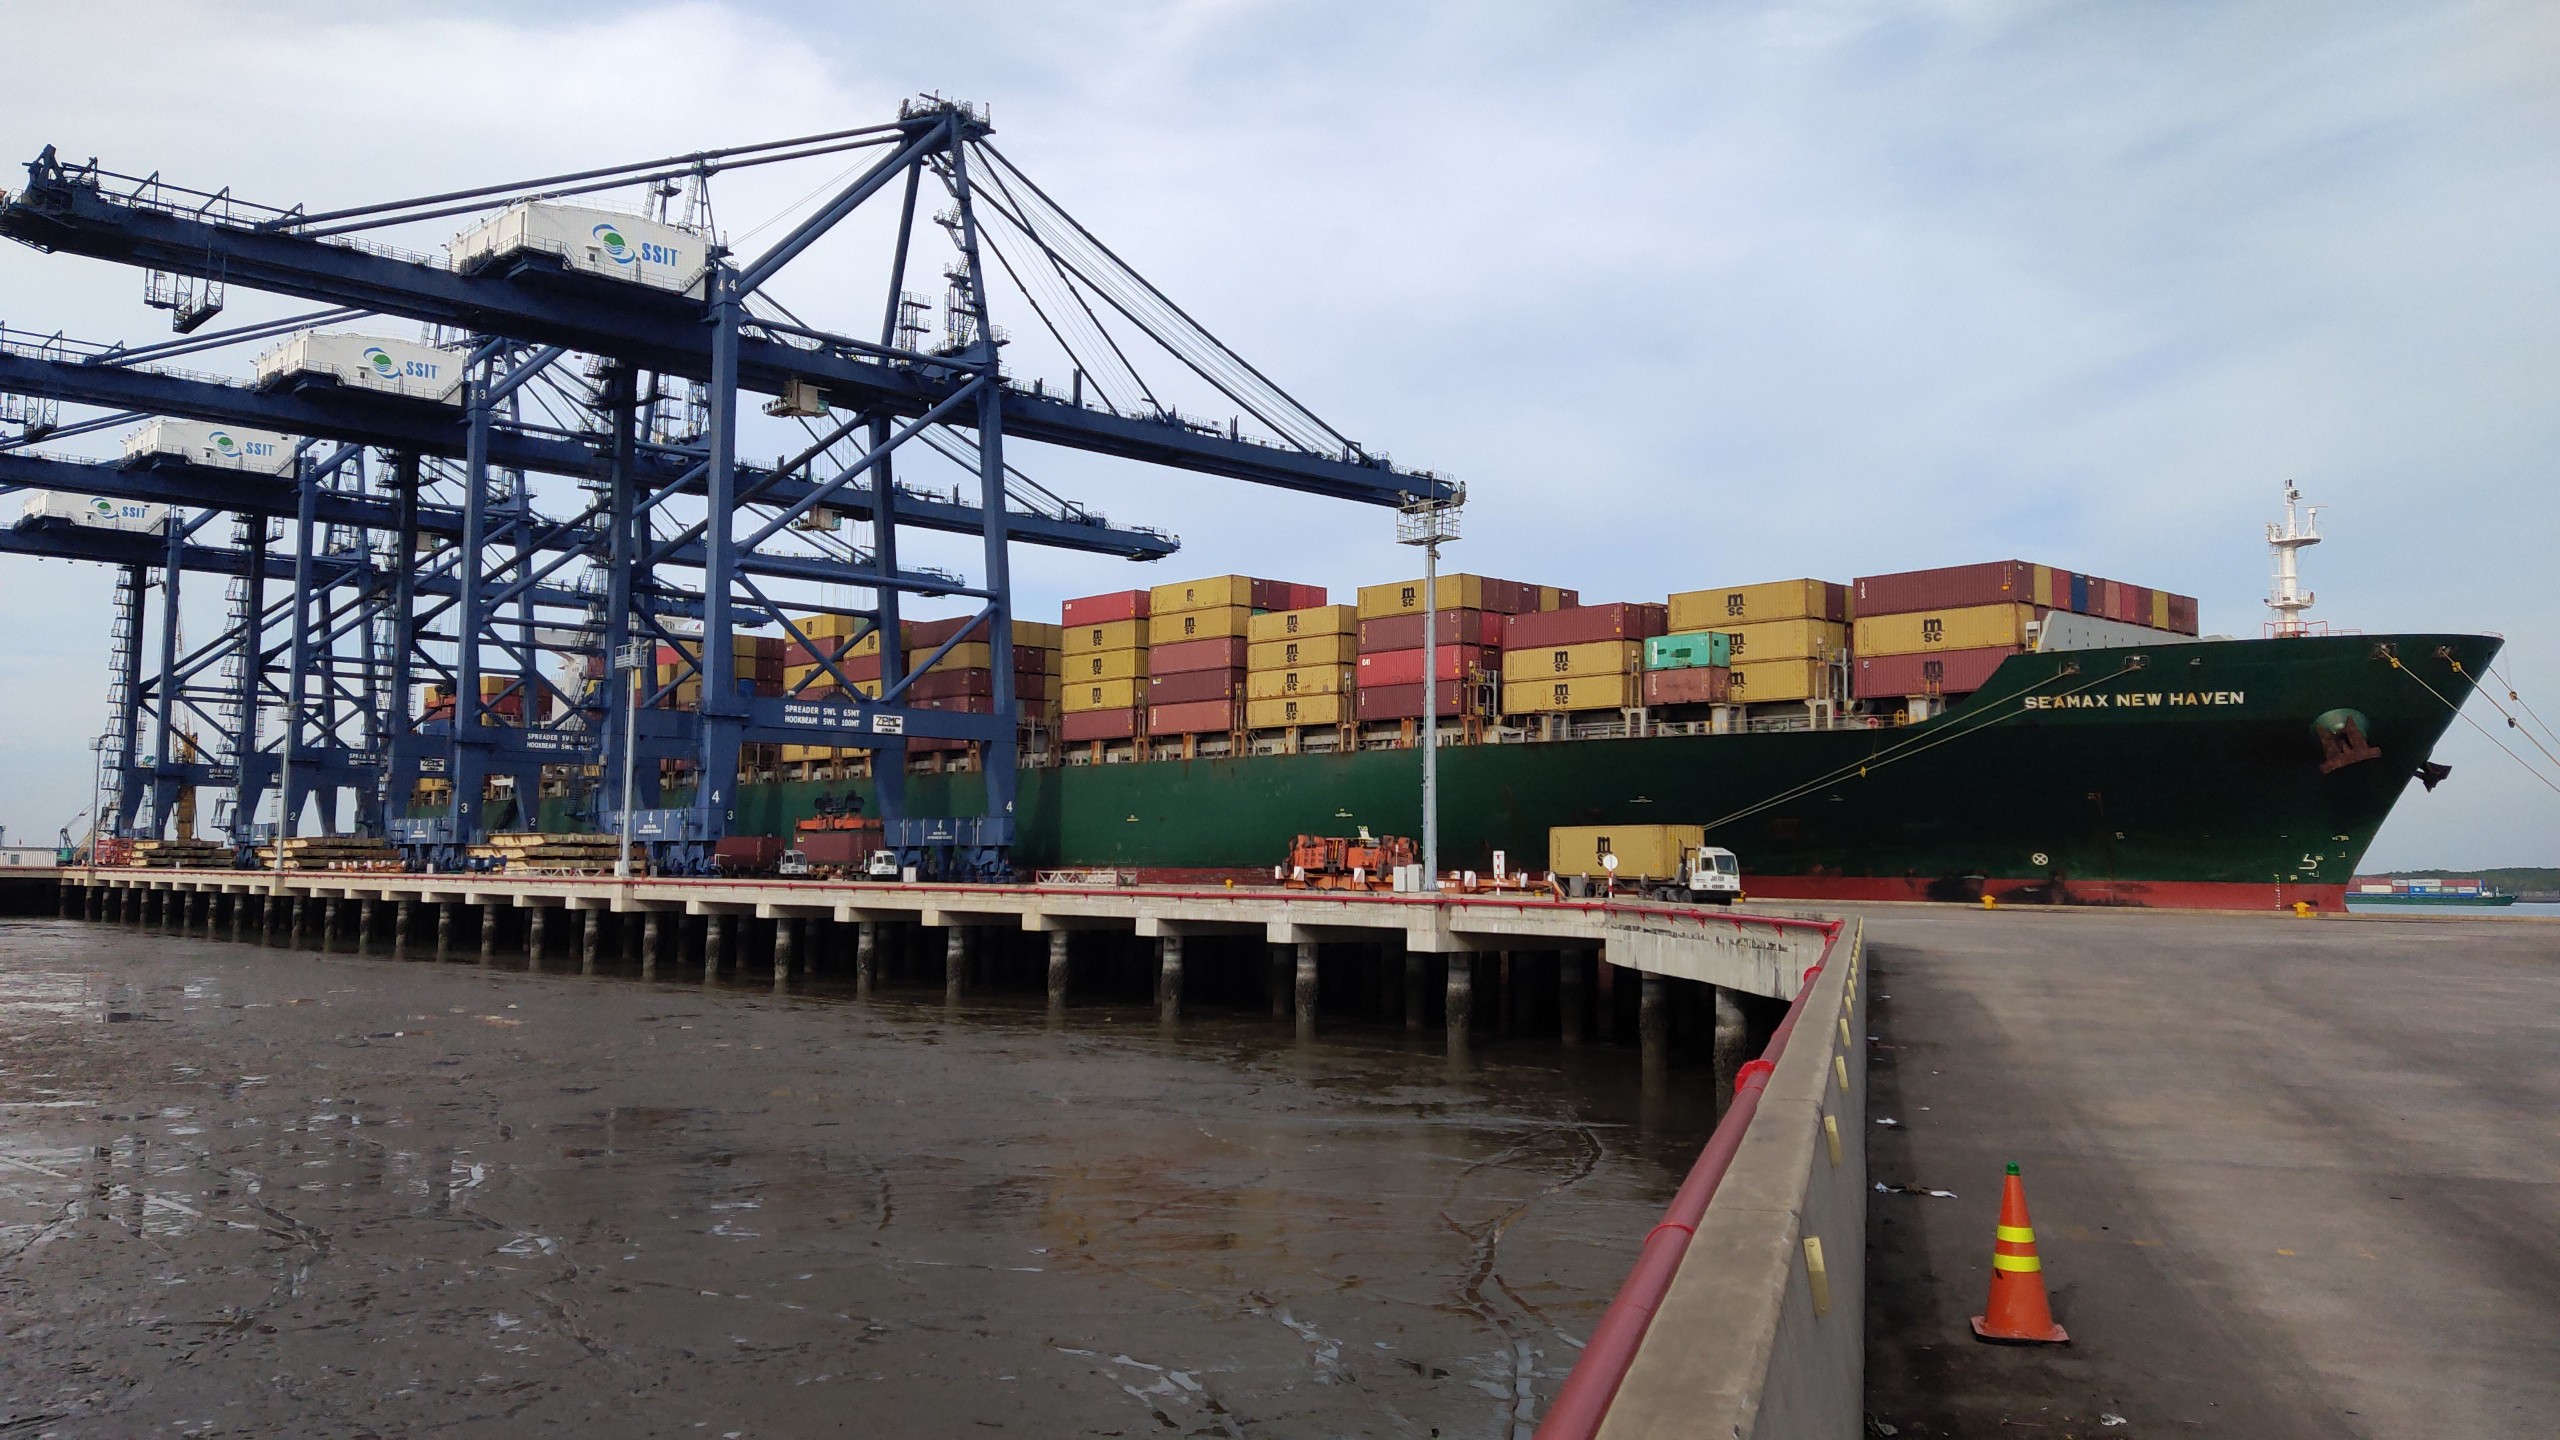 M/V SEAMAX NEW HAVEN calling SSIT on last day of 2020 with total volume more than 8,600 TEU